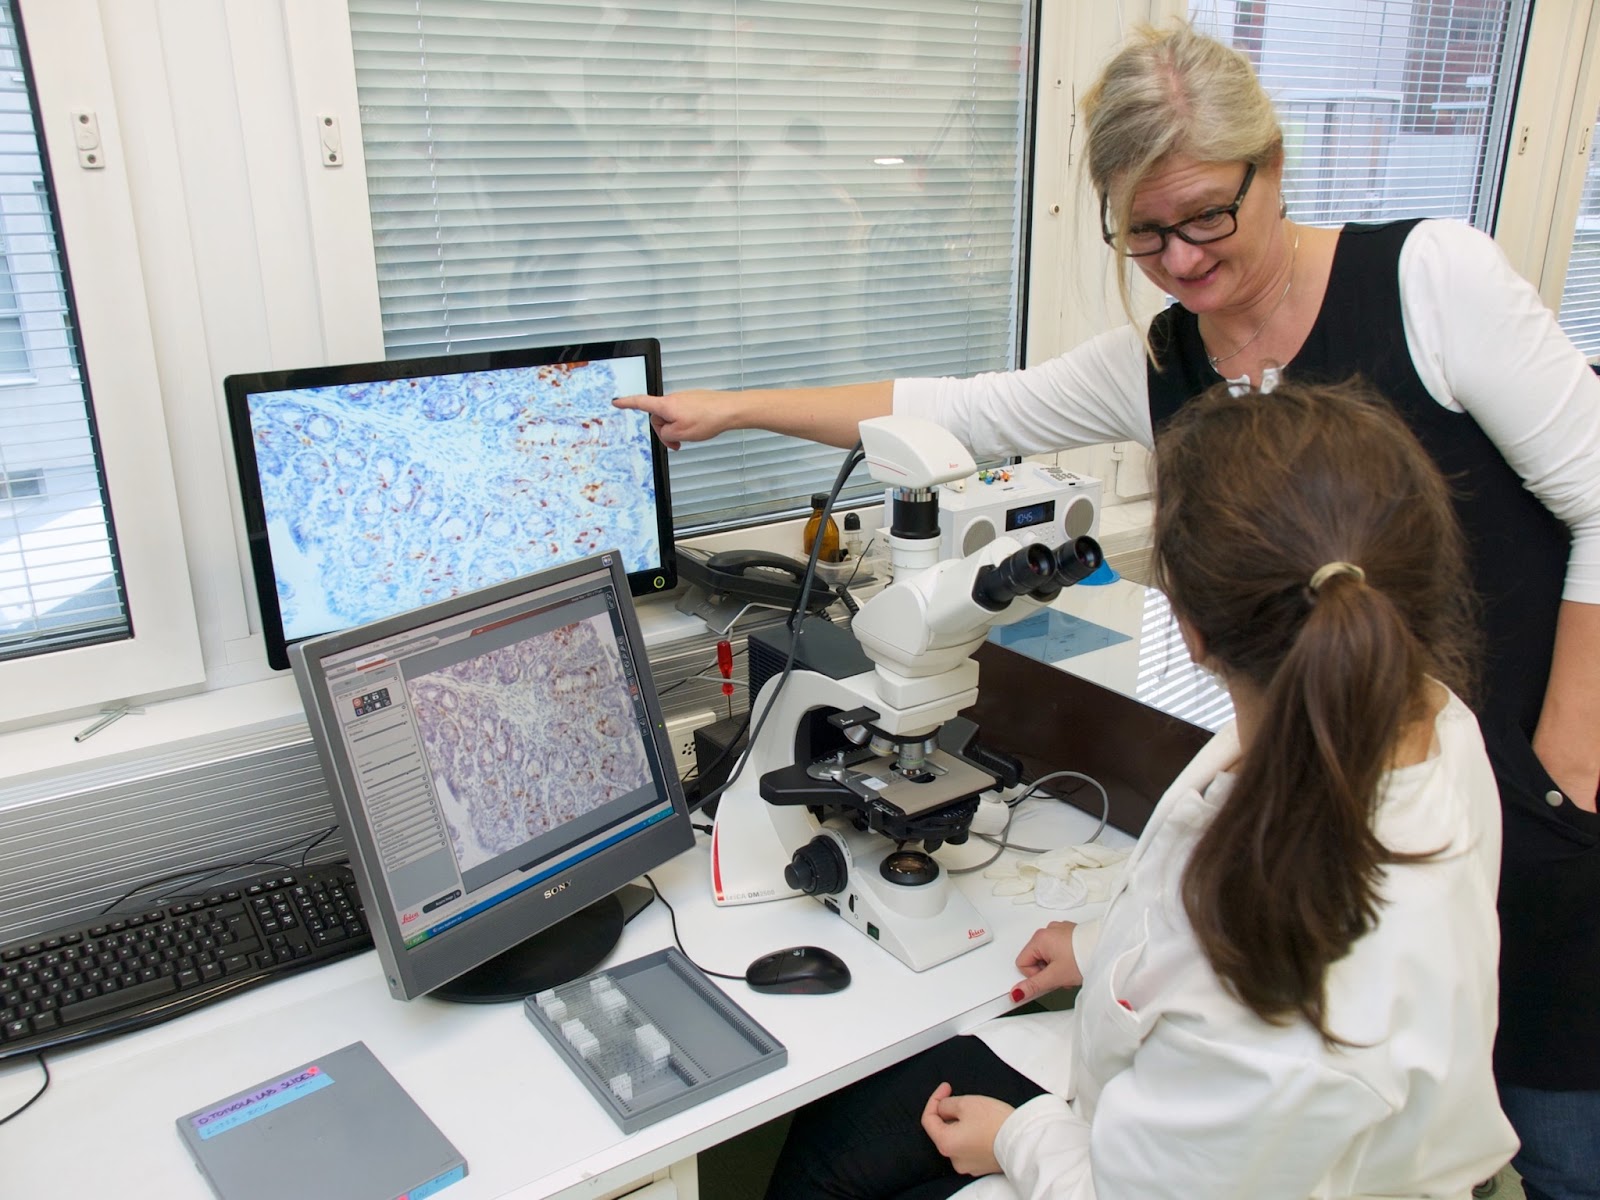 Diana Toivola, of the Turku BioImaging MSc in Biomedical Imaging, interacts with a student at the microscope.